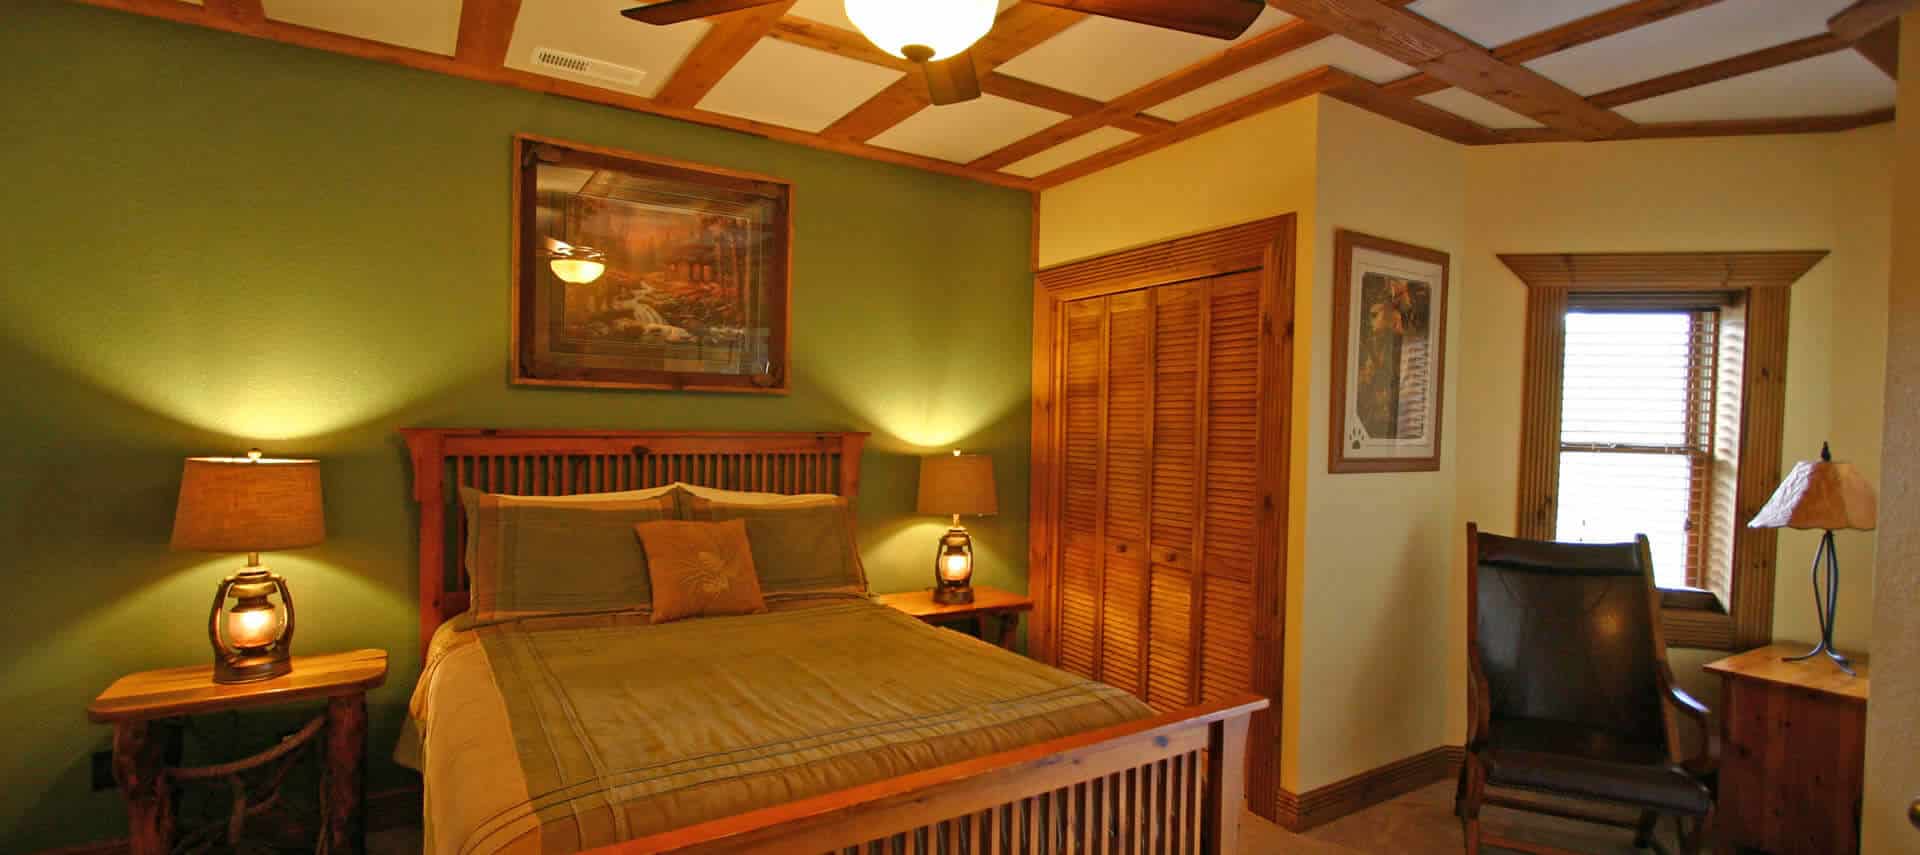 Large bedroom in green and cream with wooden accents, bed, nighstand and chair.